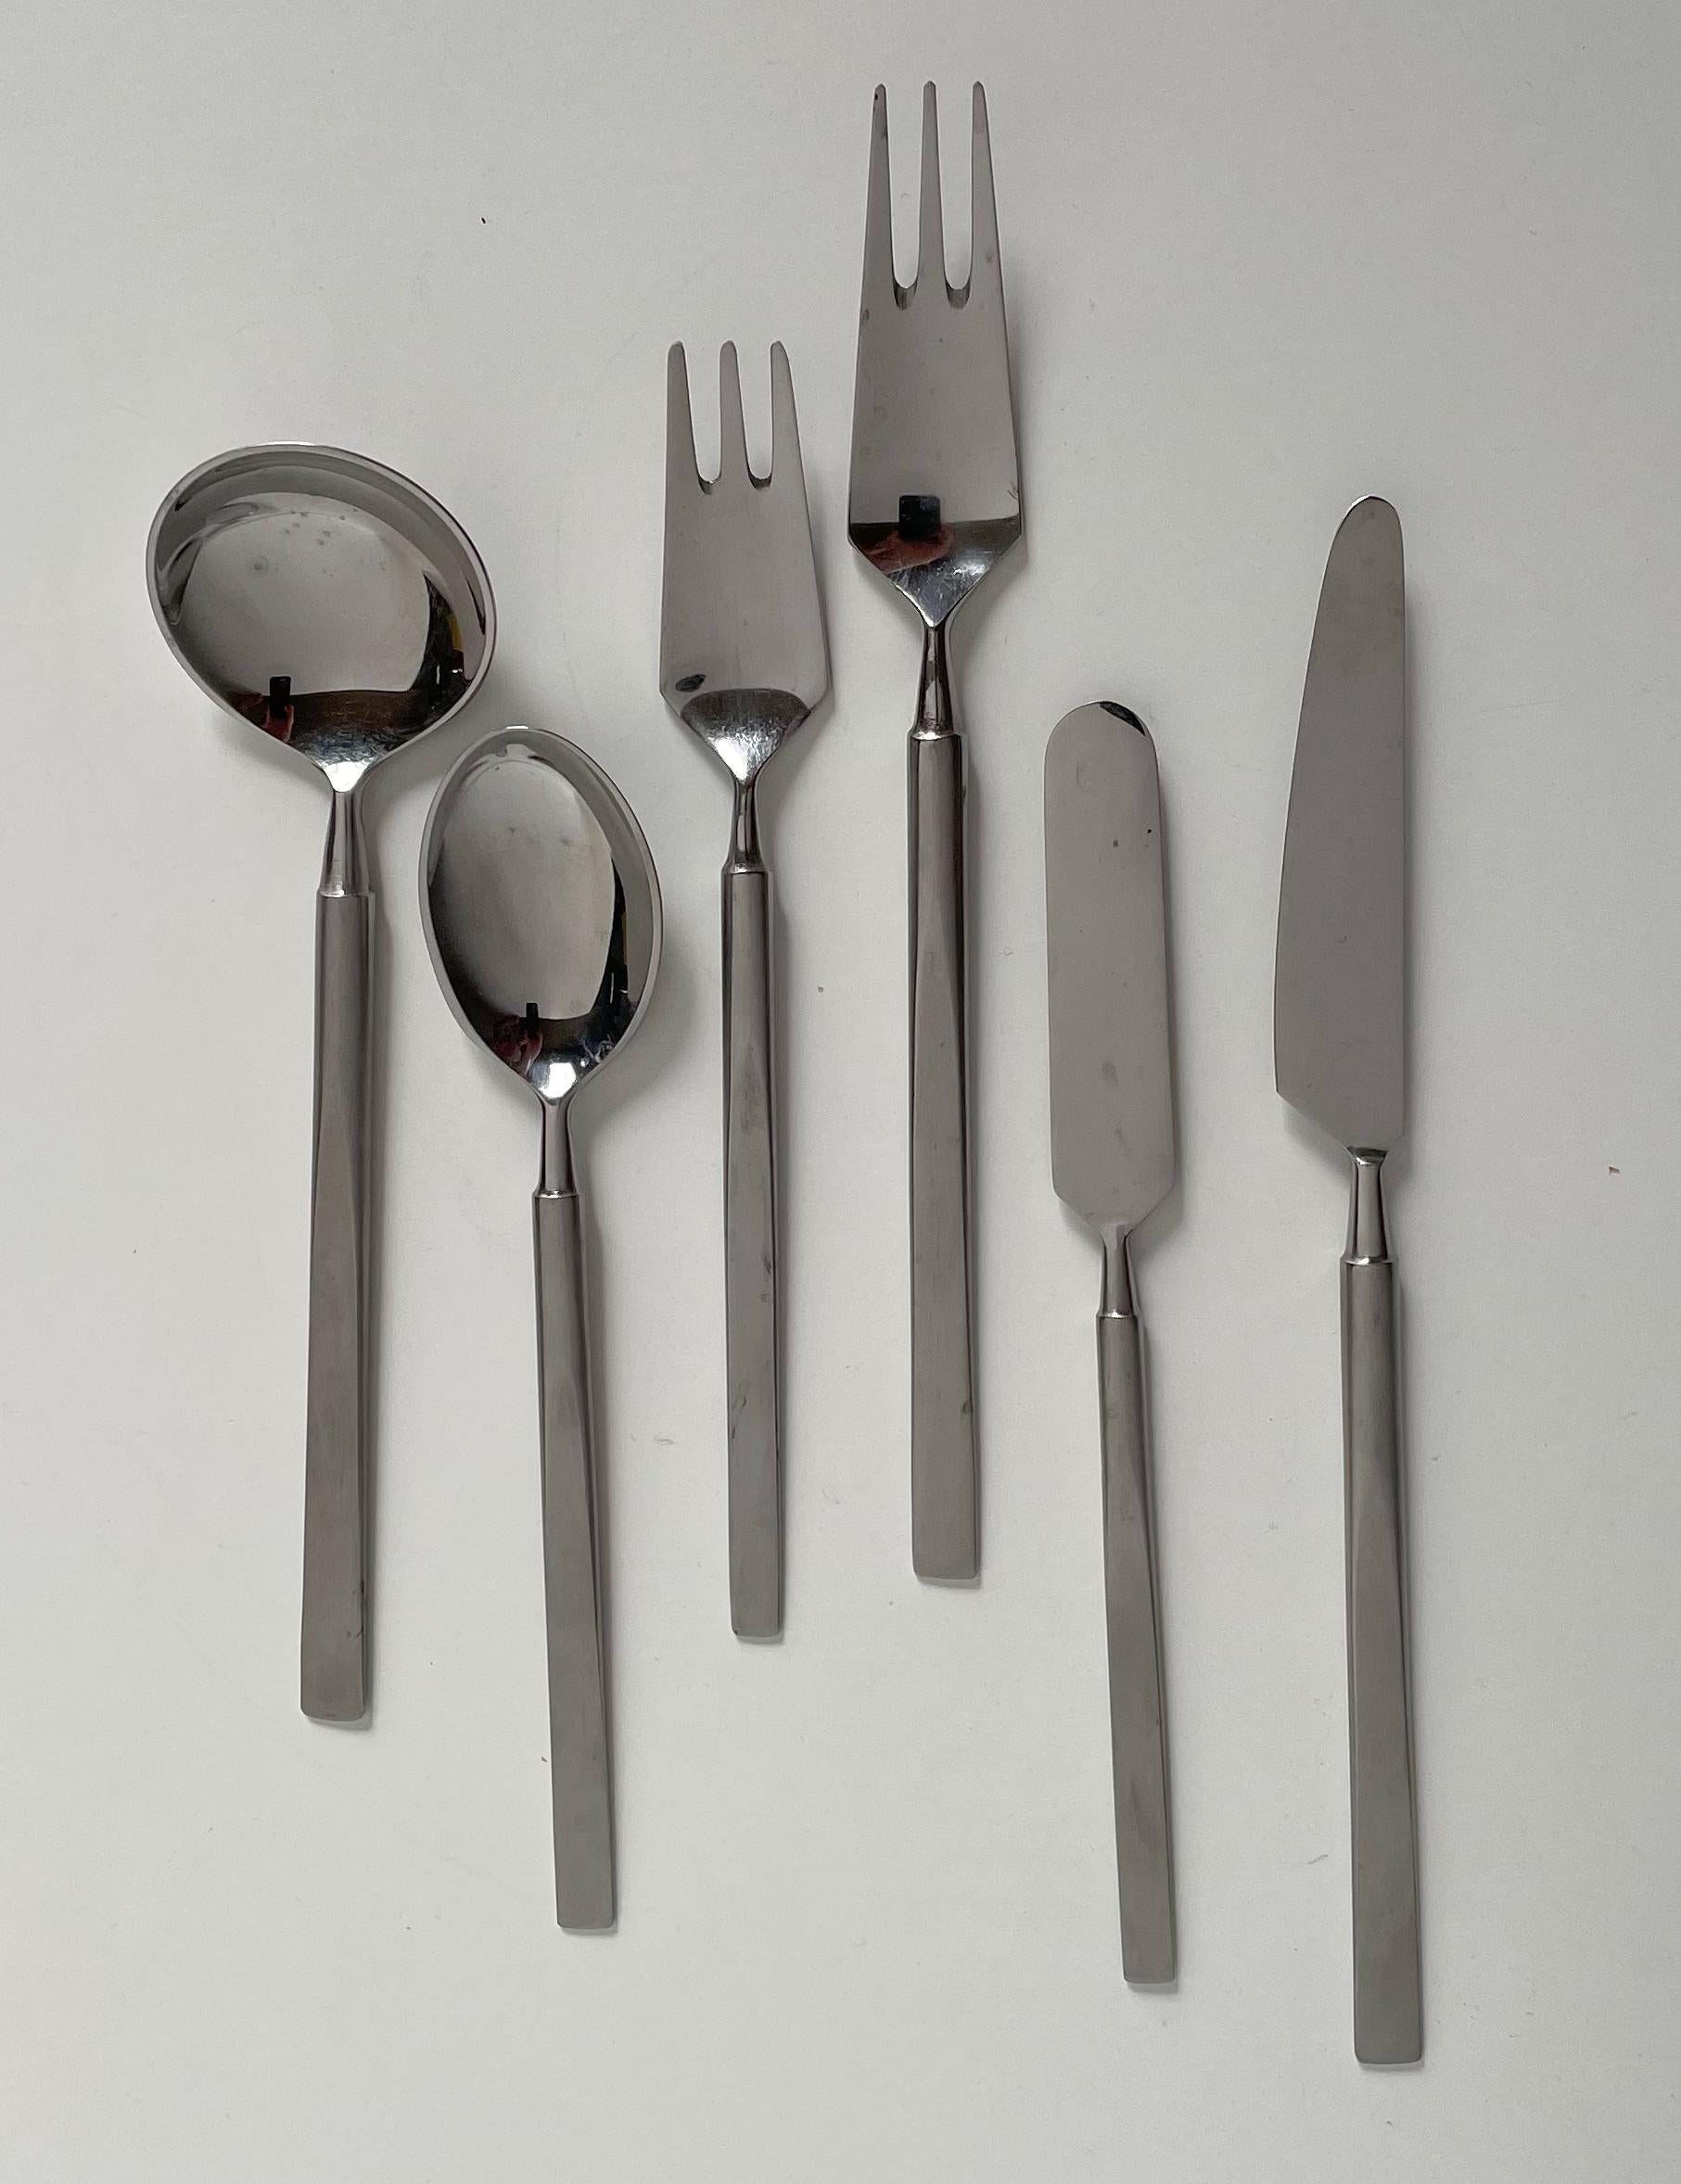 'Obelisk' flatware set designed in 1954 by Erik Herlow for Universal Steel of Denmark and retailed worldwide by Georg Jensen. Each technically innovative piece was wrought from a single piece of 18/8 stainless steel, then hand-finished with a